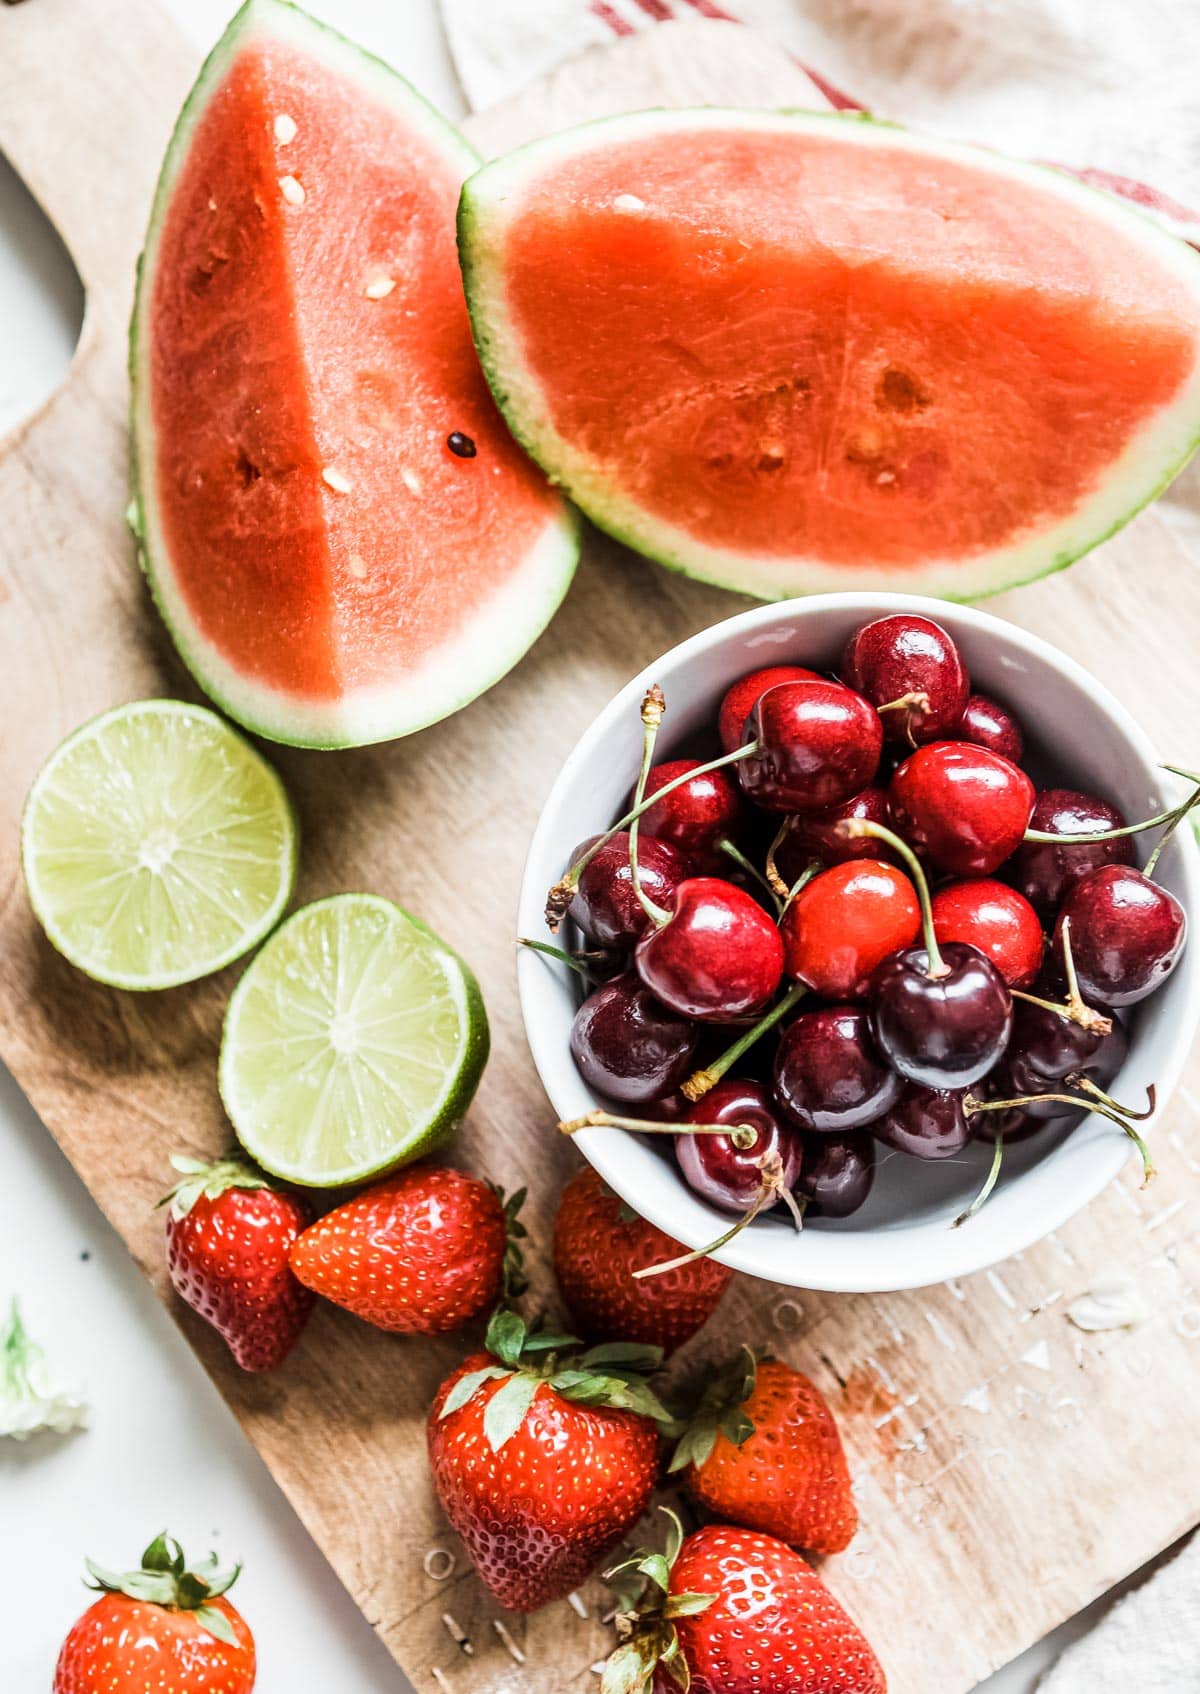 ingredients for a delicious summer smoothie on a wooden cutting board including watermelon, lime, cherries and strawberries